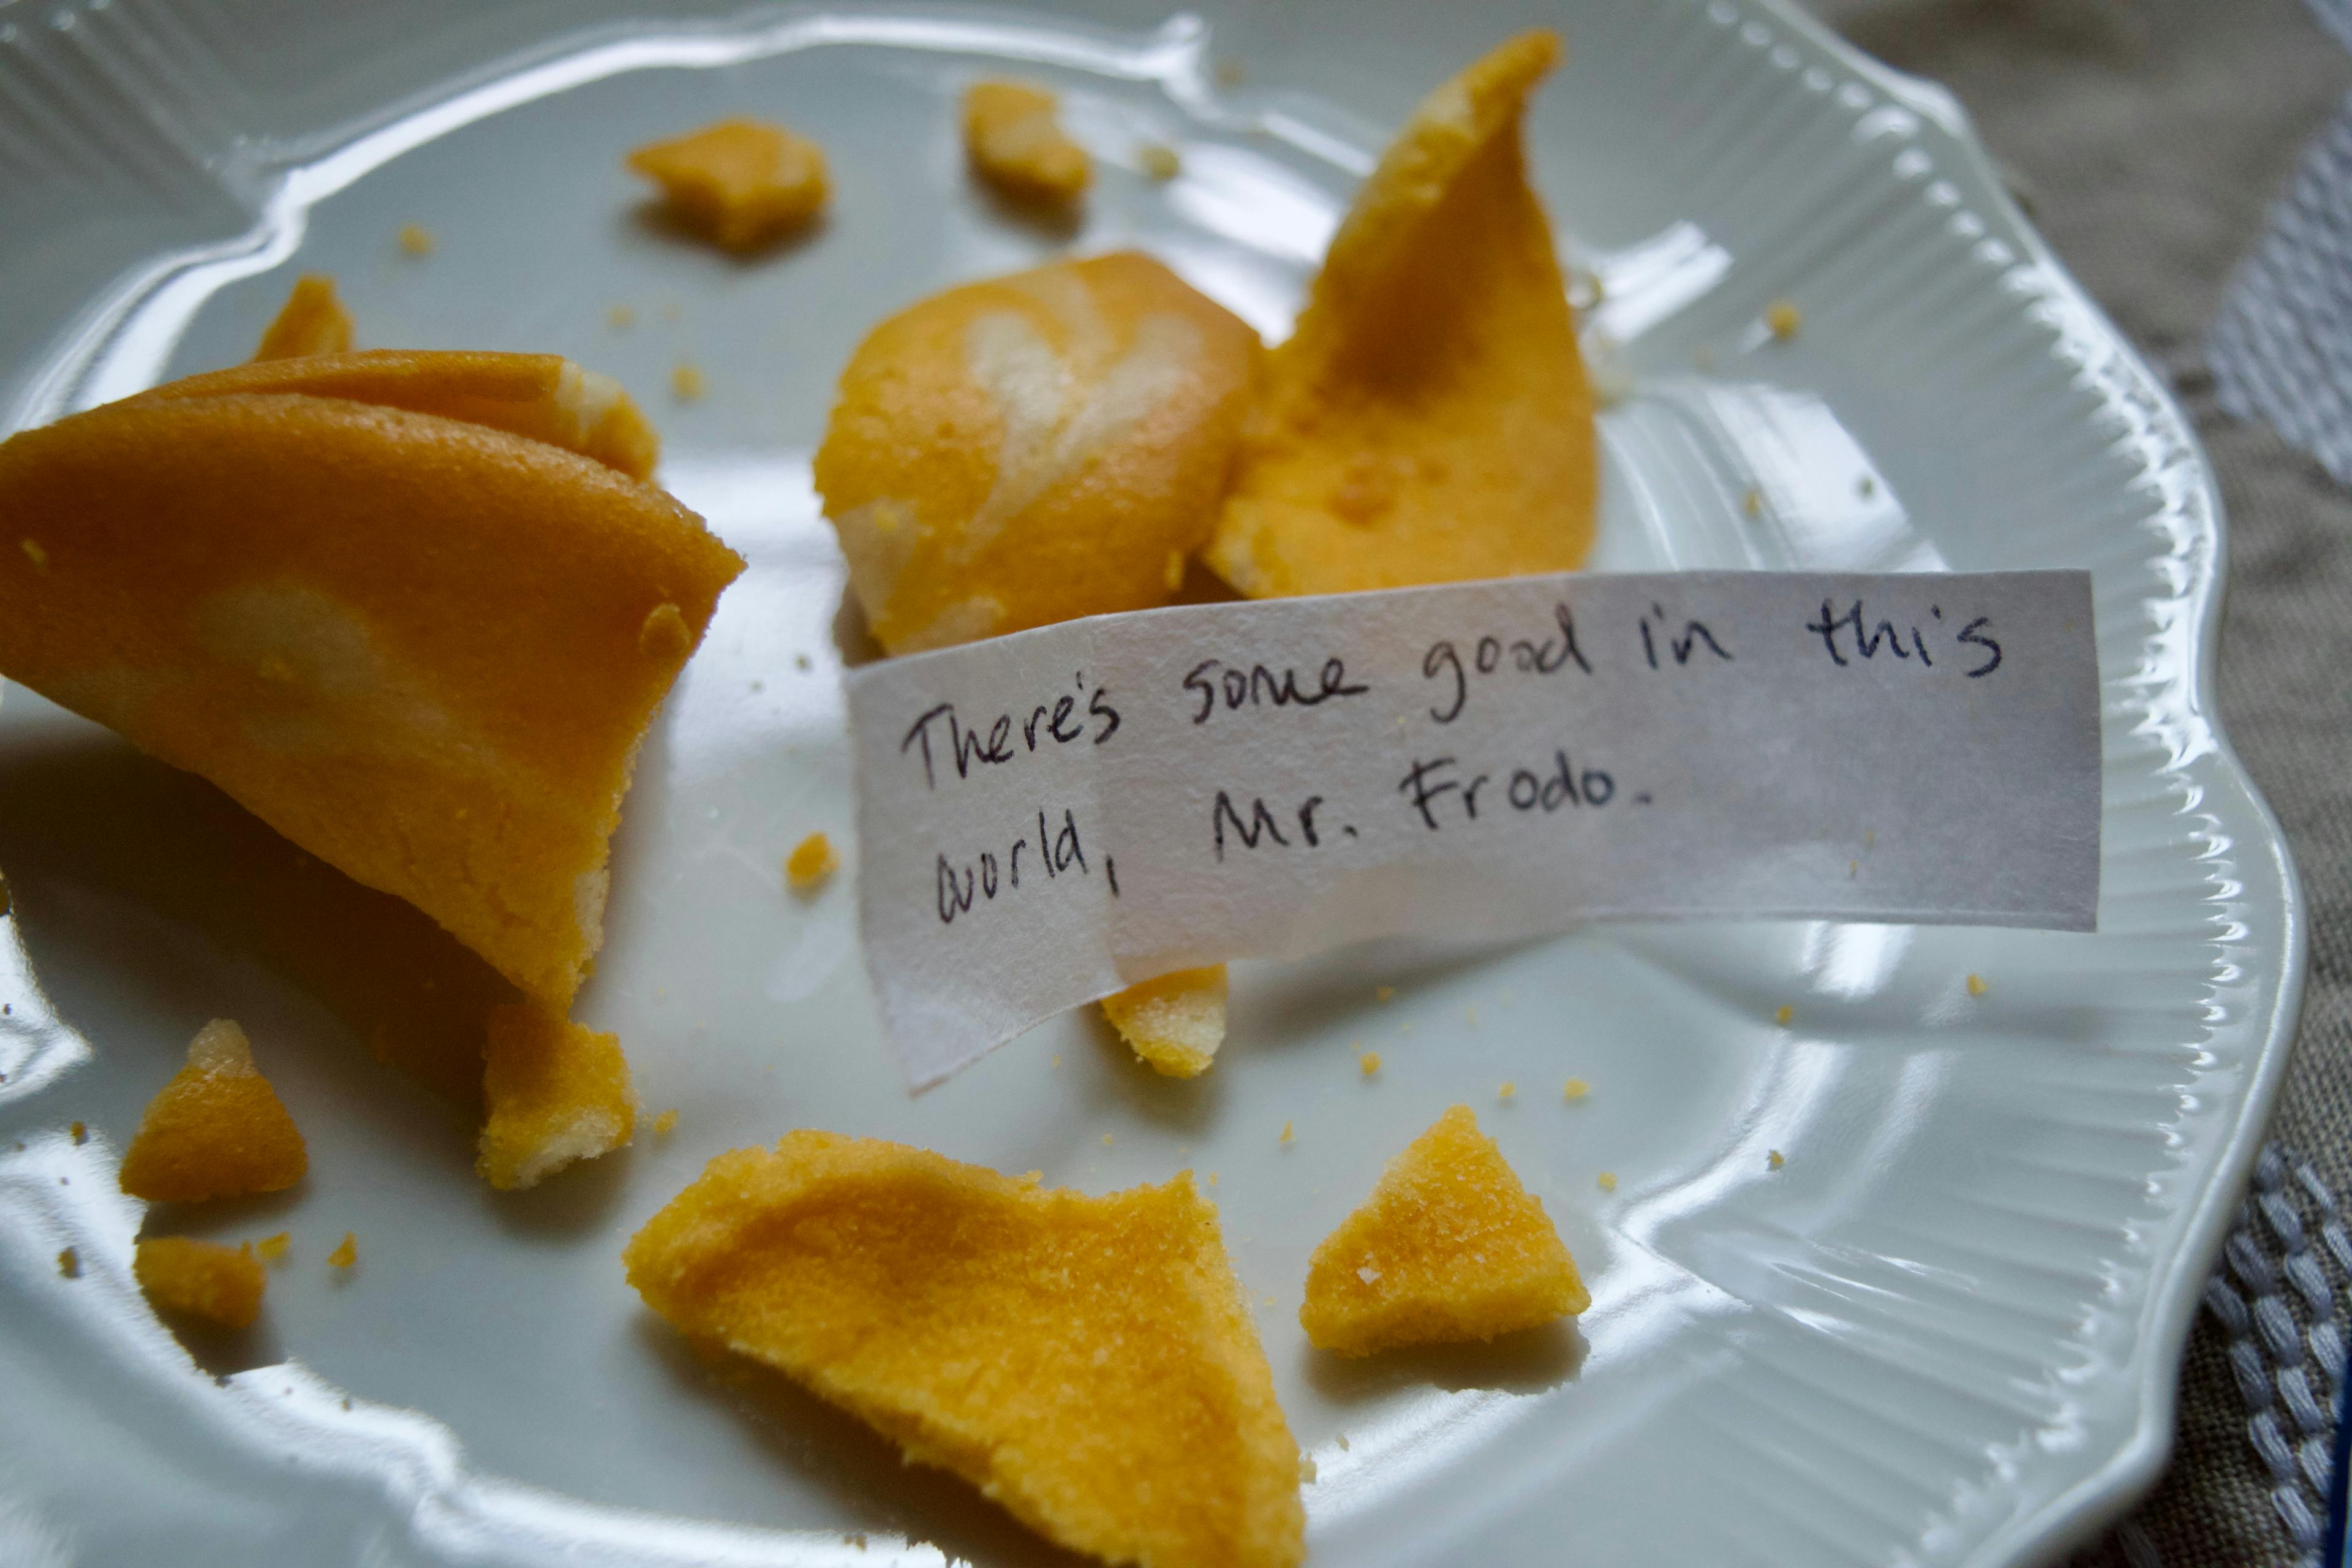 A broke fortune cookie with the fortune "There is still some good in this world, Mr. Frodo."